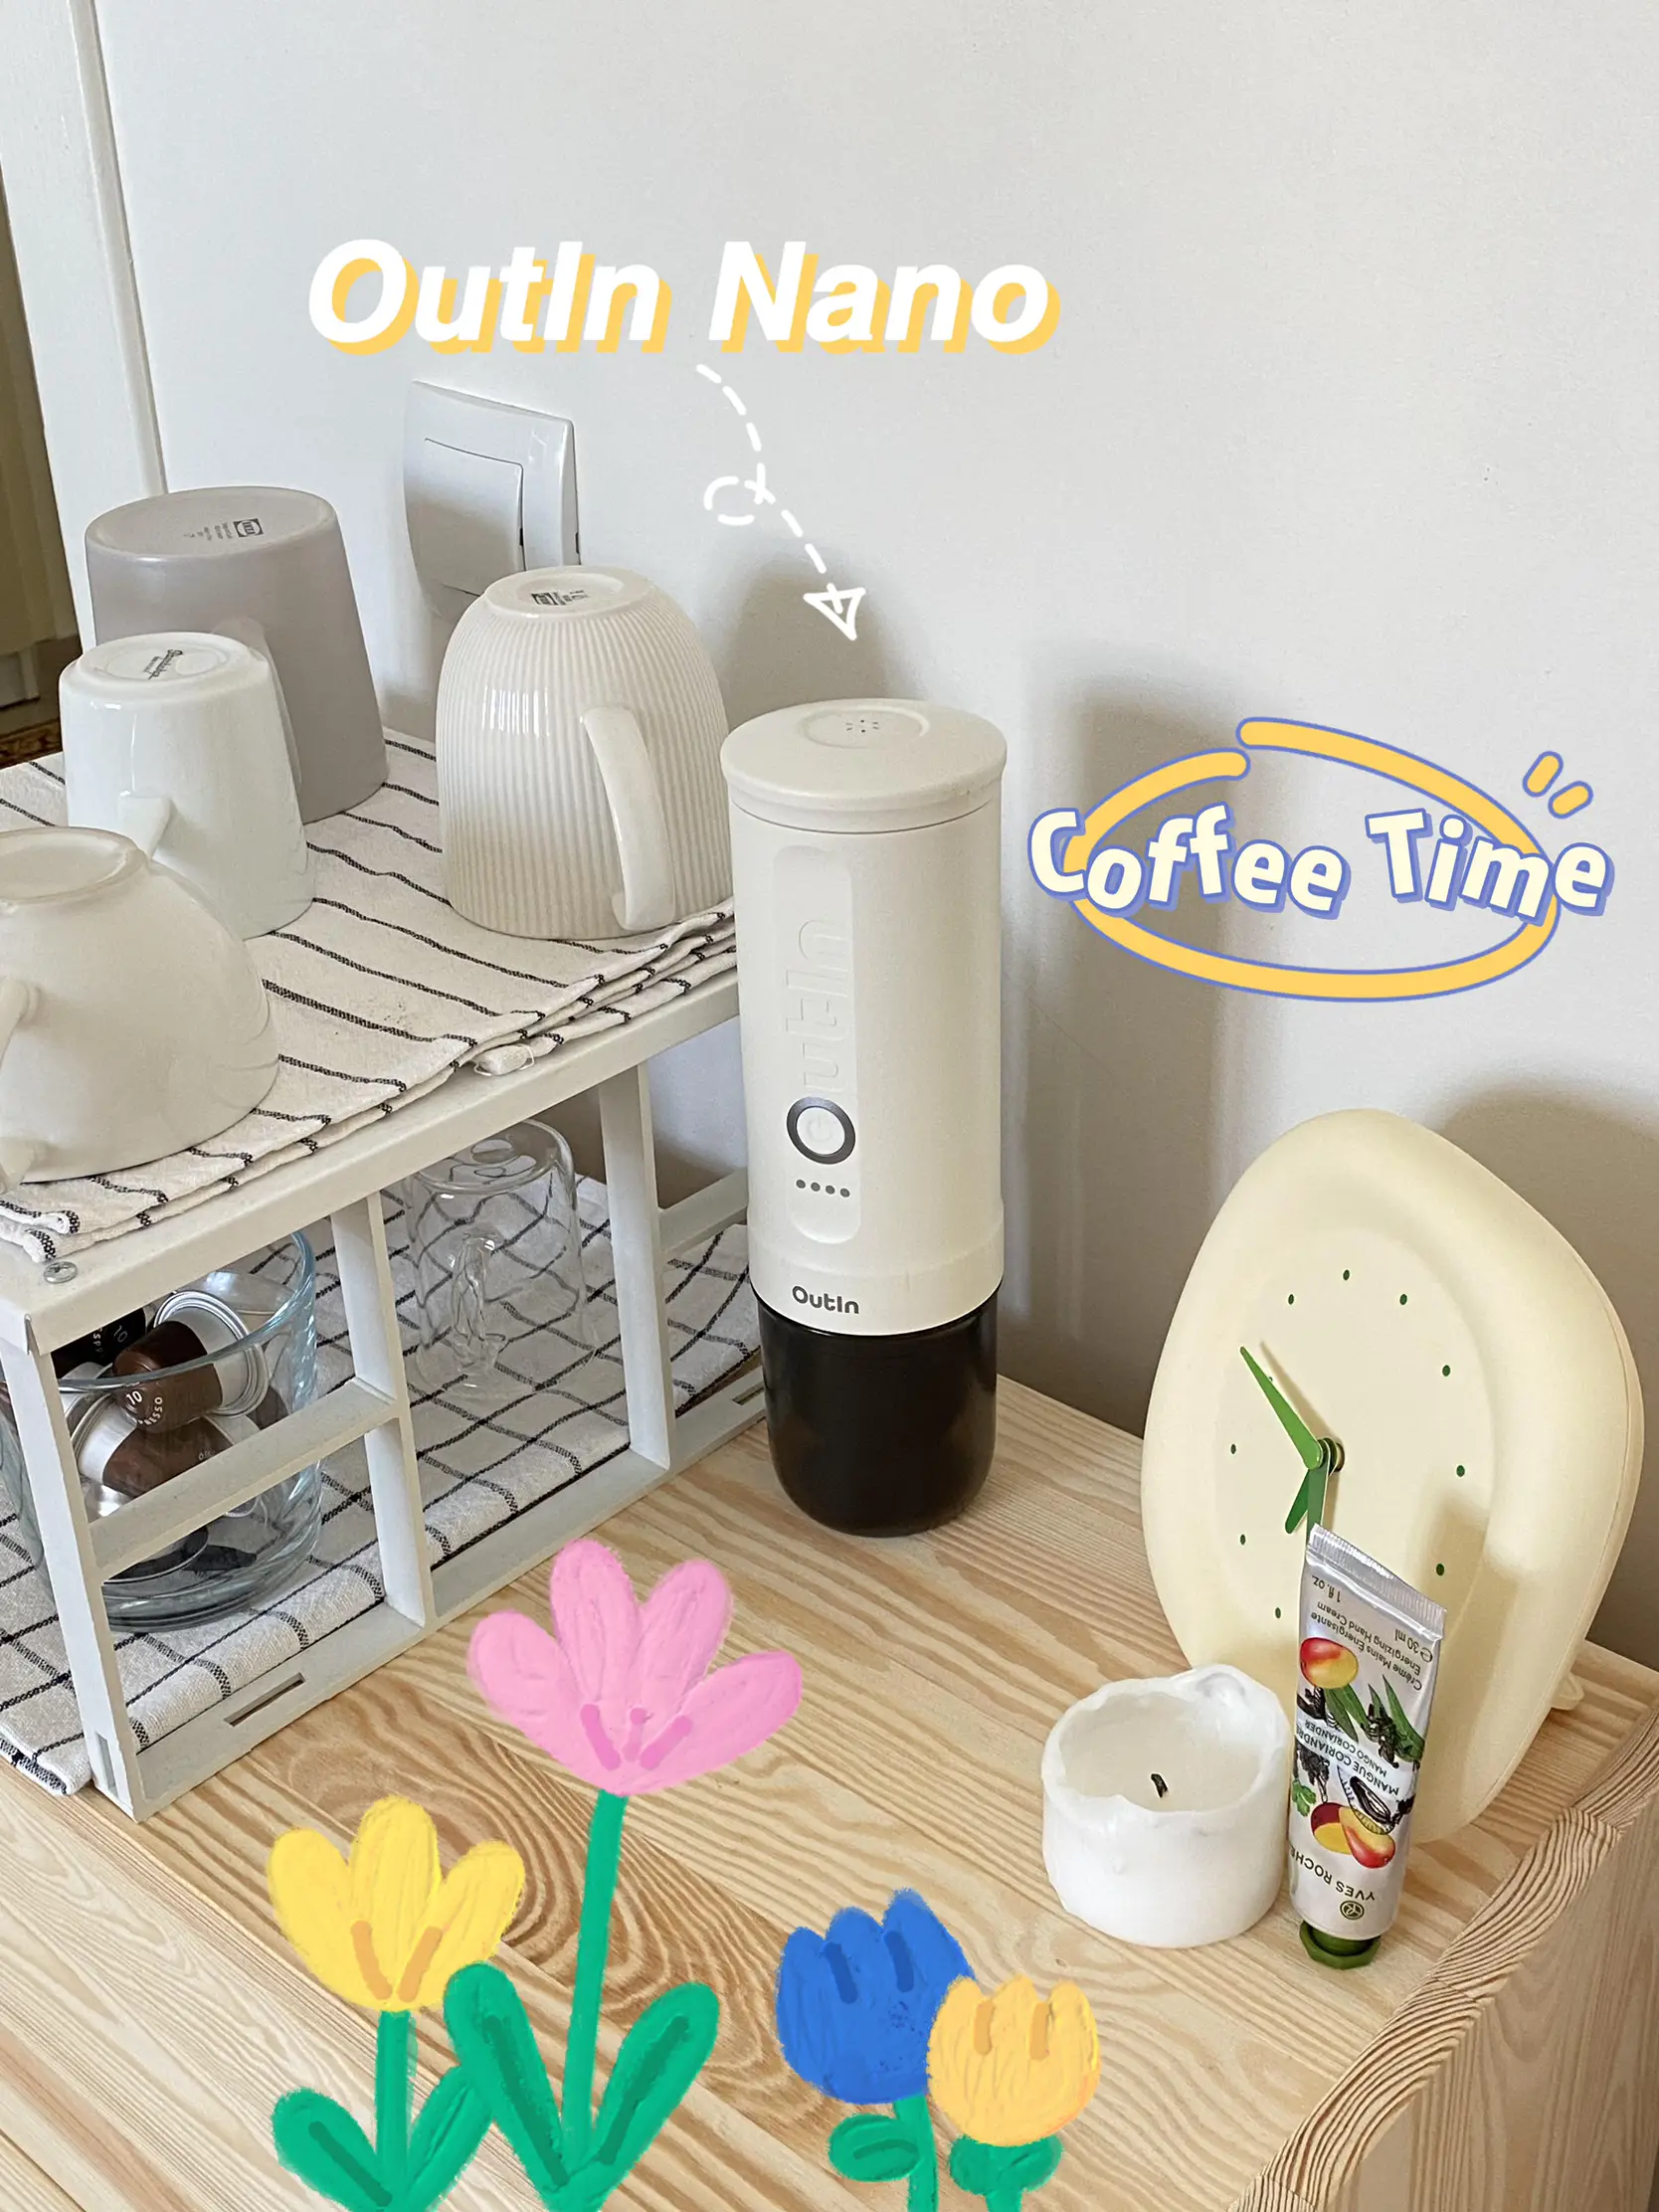 💚Coffee Time with Outin Nano💚, Gallery posted by Outin_Official